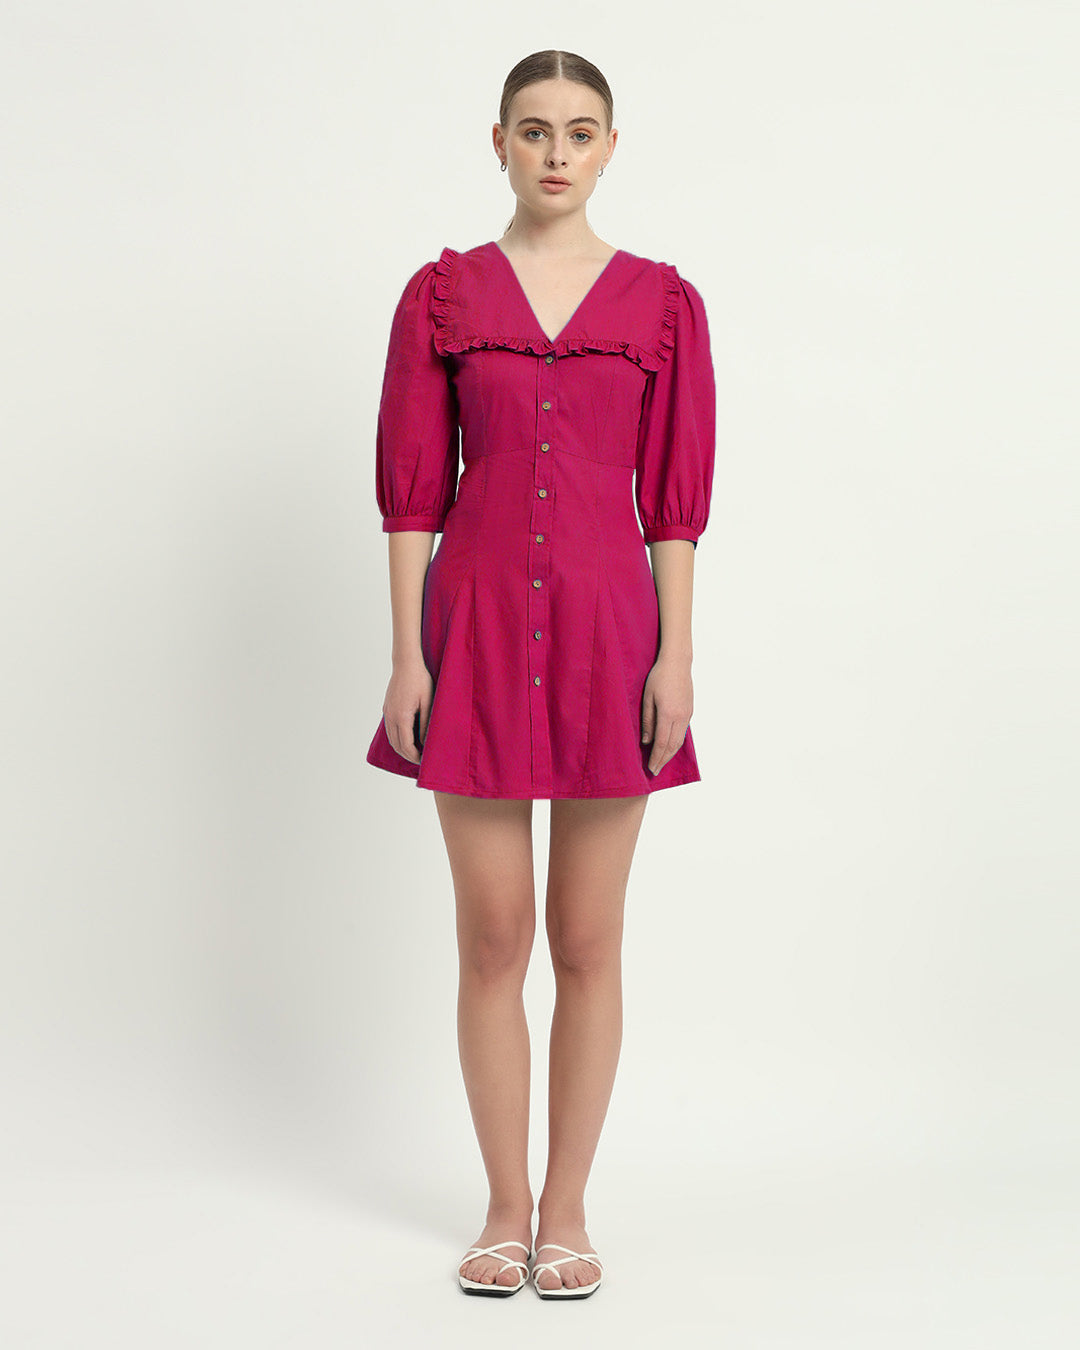 The Isabela Berry Cotton Dress